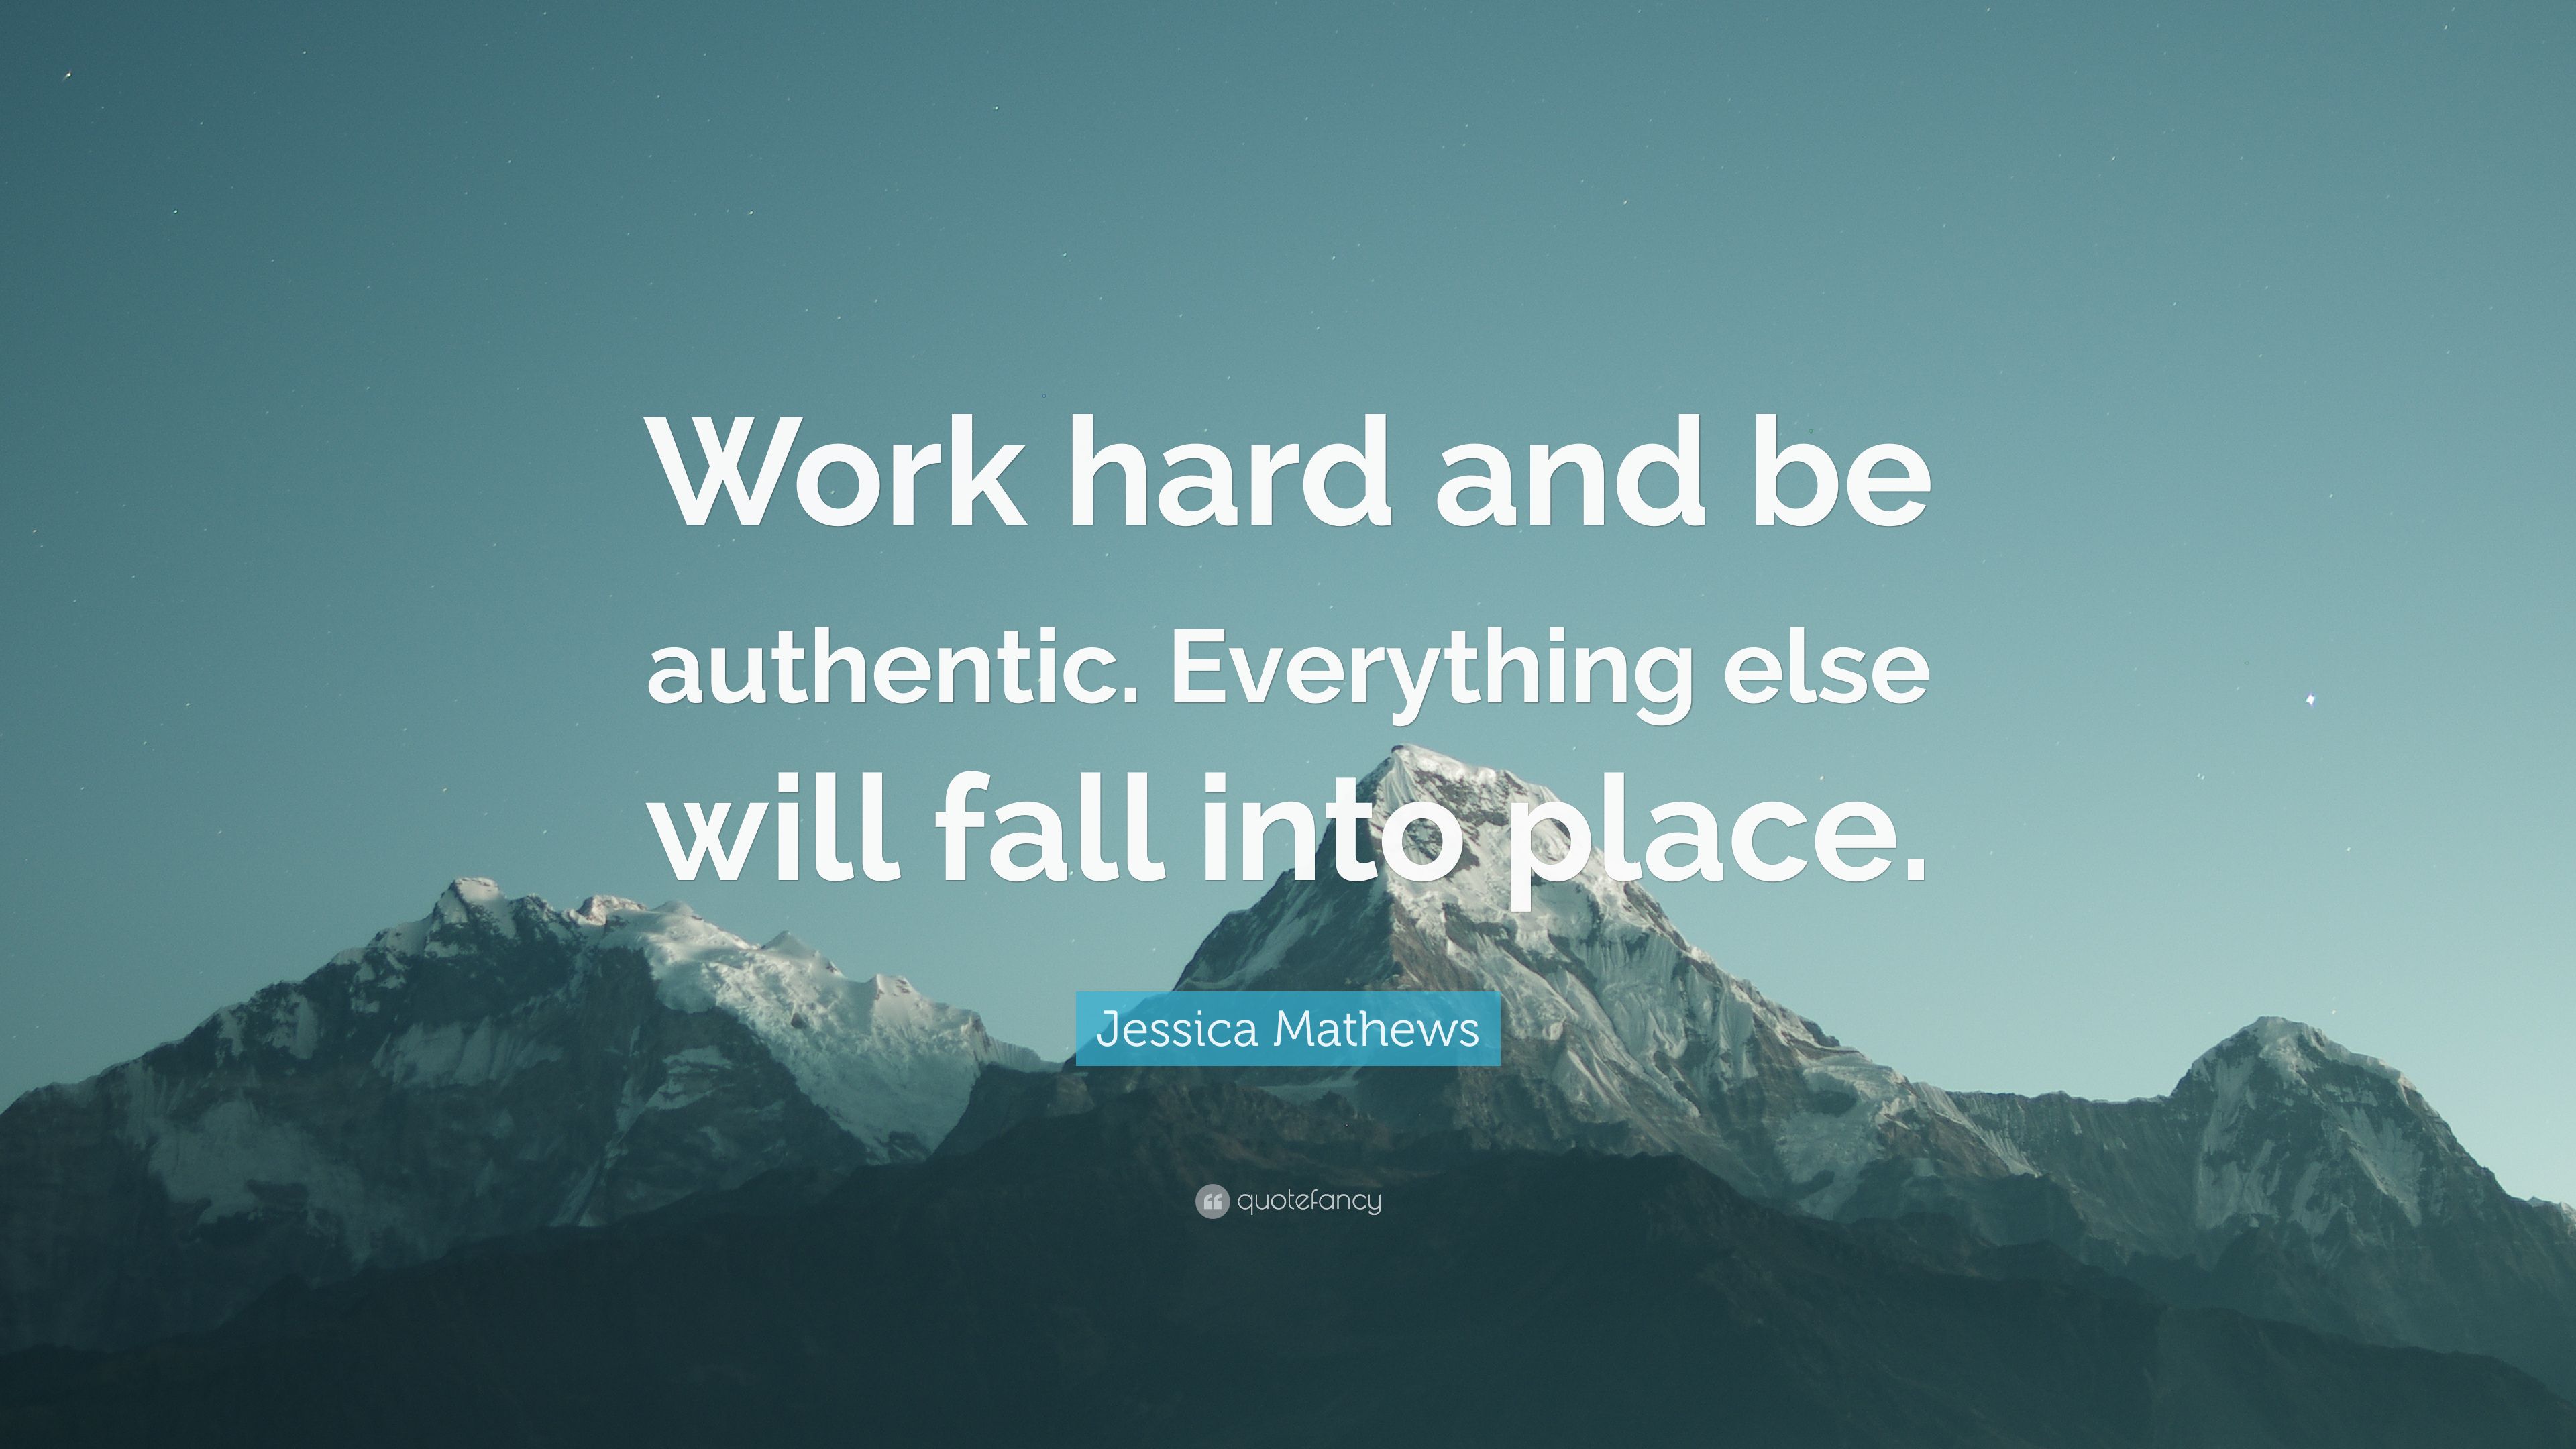 Jessica Mathews Quote: “Work hard and be authentic. Everything